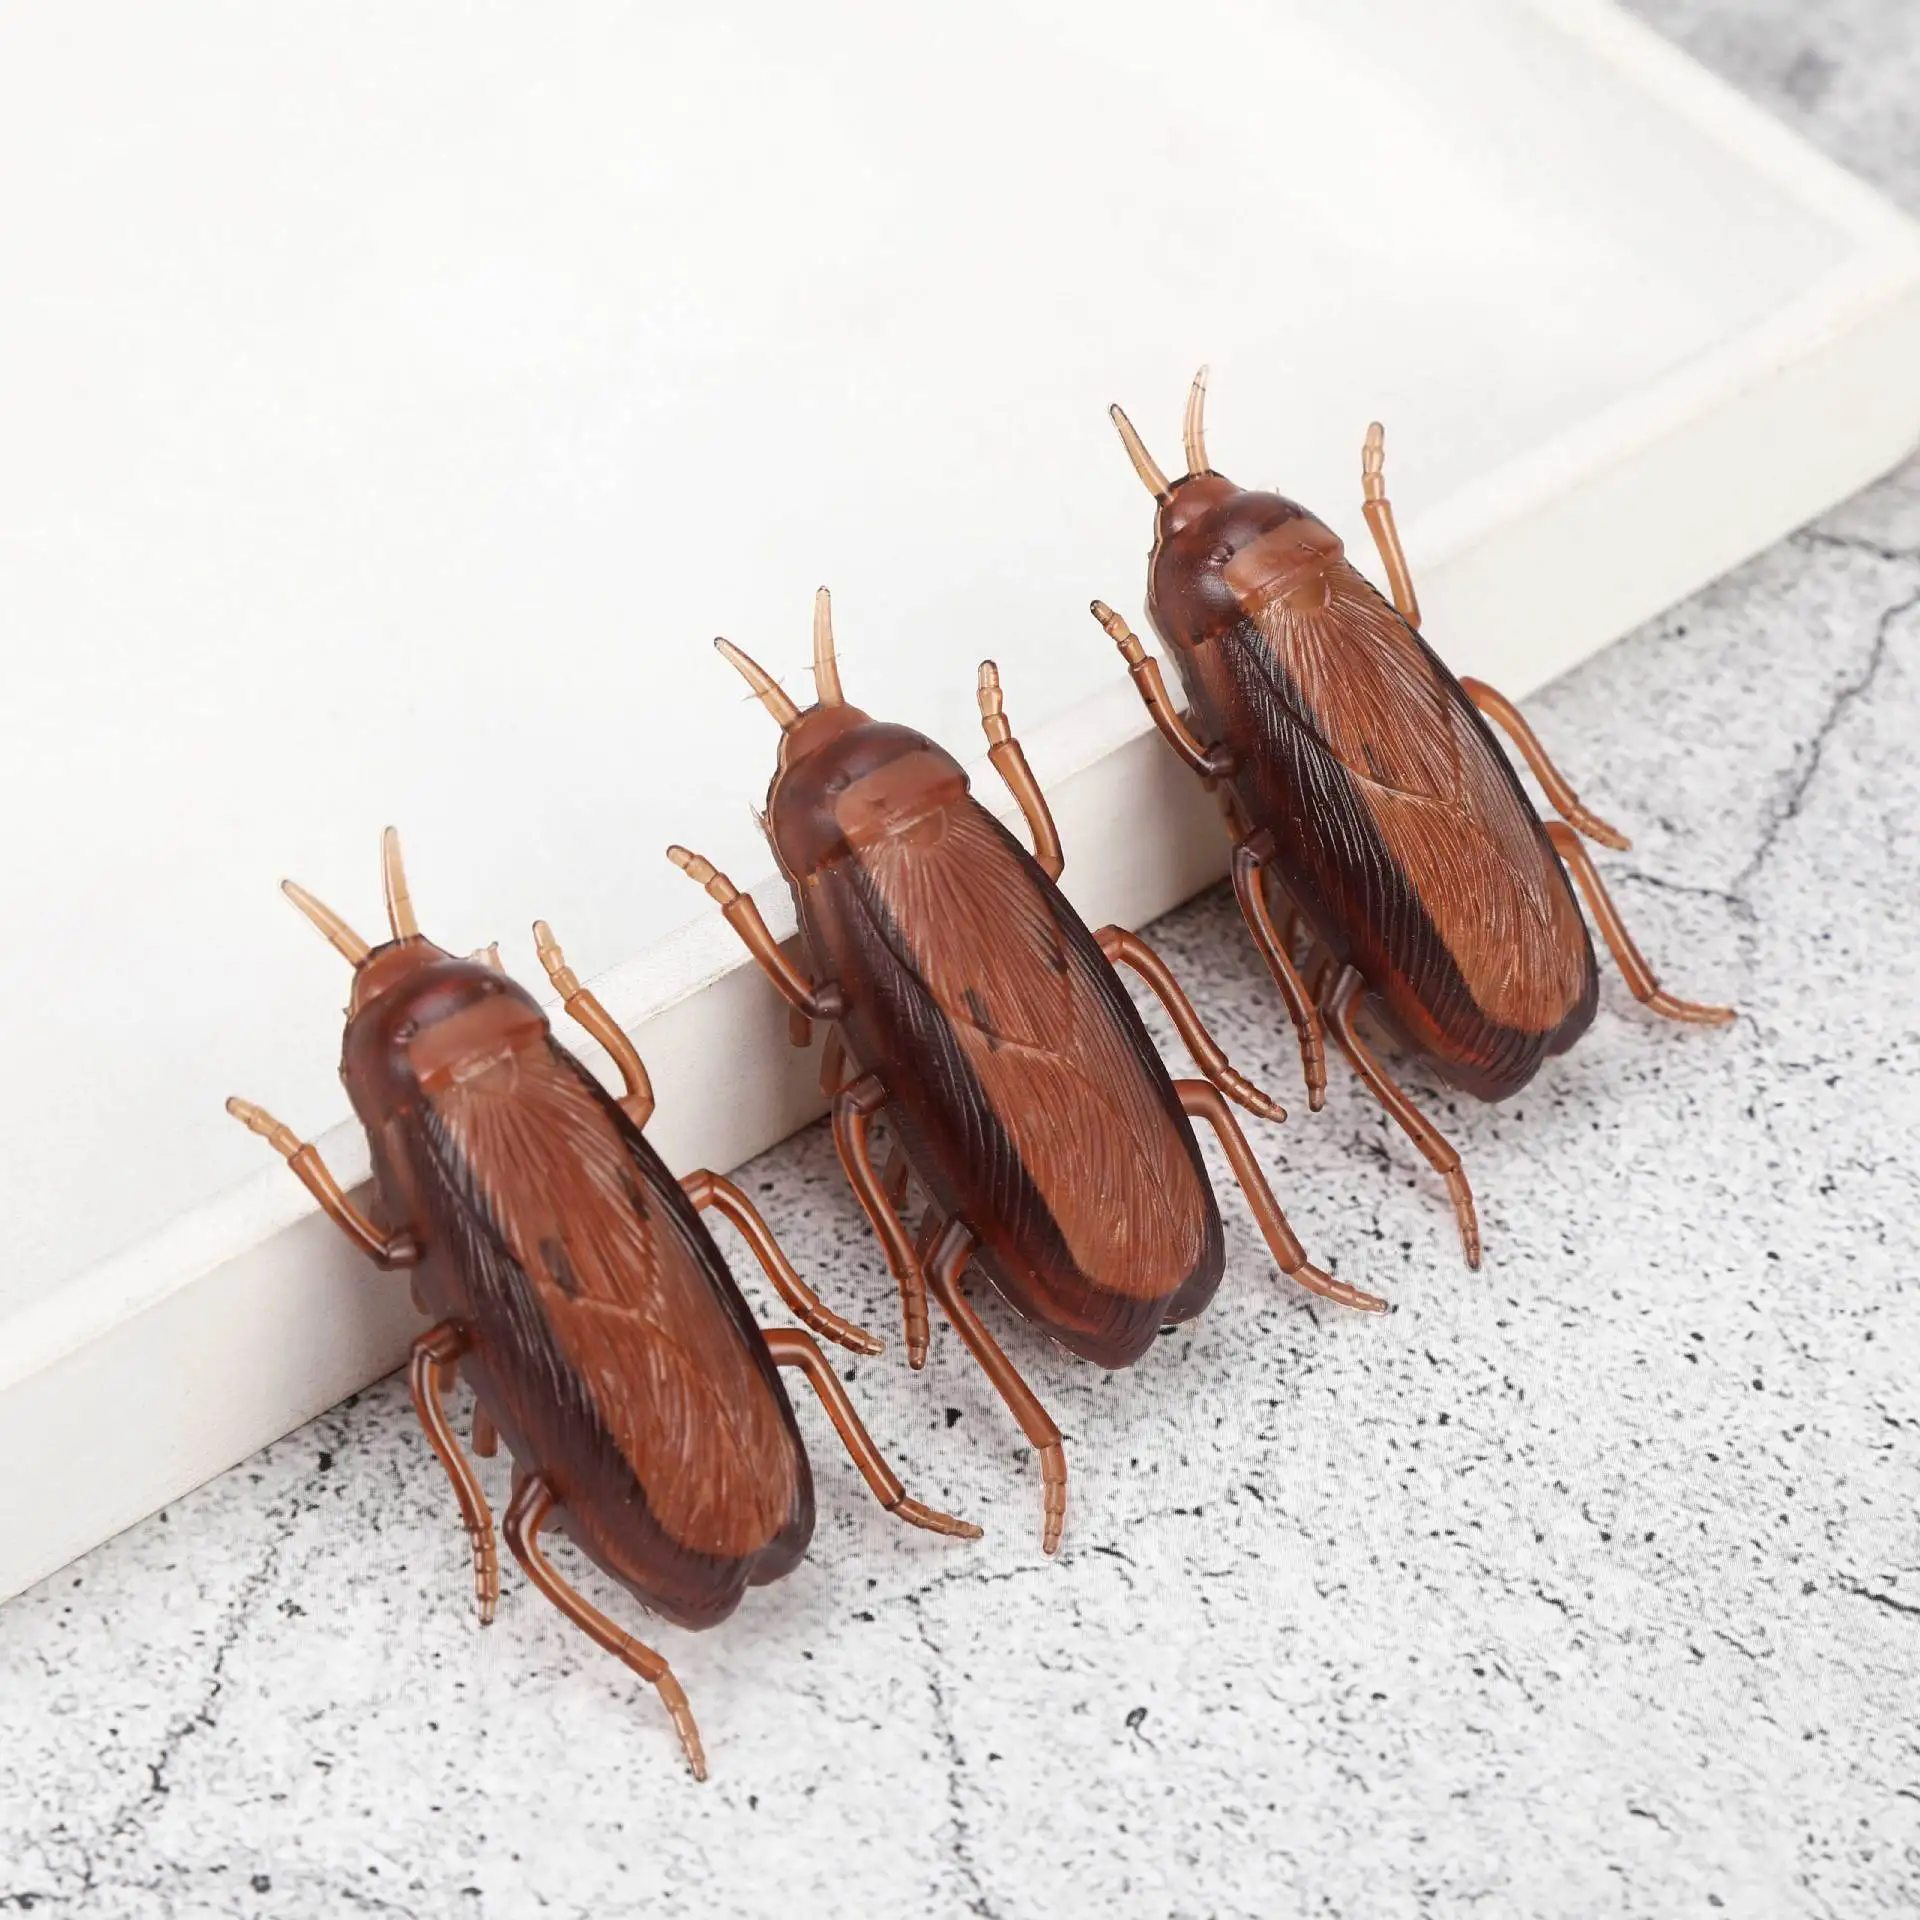 

1PCS Novelty Funny Toy Electric Vibrating Crawling Fake Cockroach Insect Toy Prank Simulator Disgusting Scary Spoof Tricky Toy